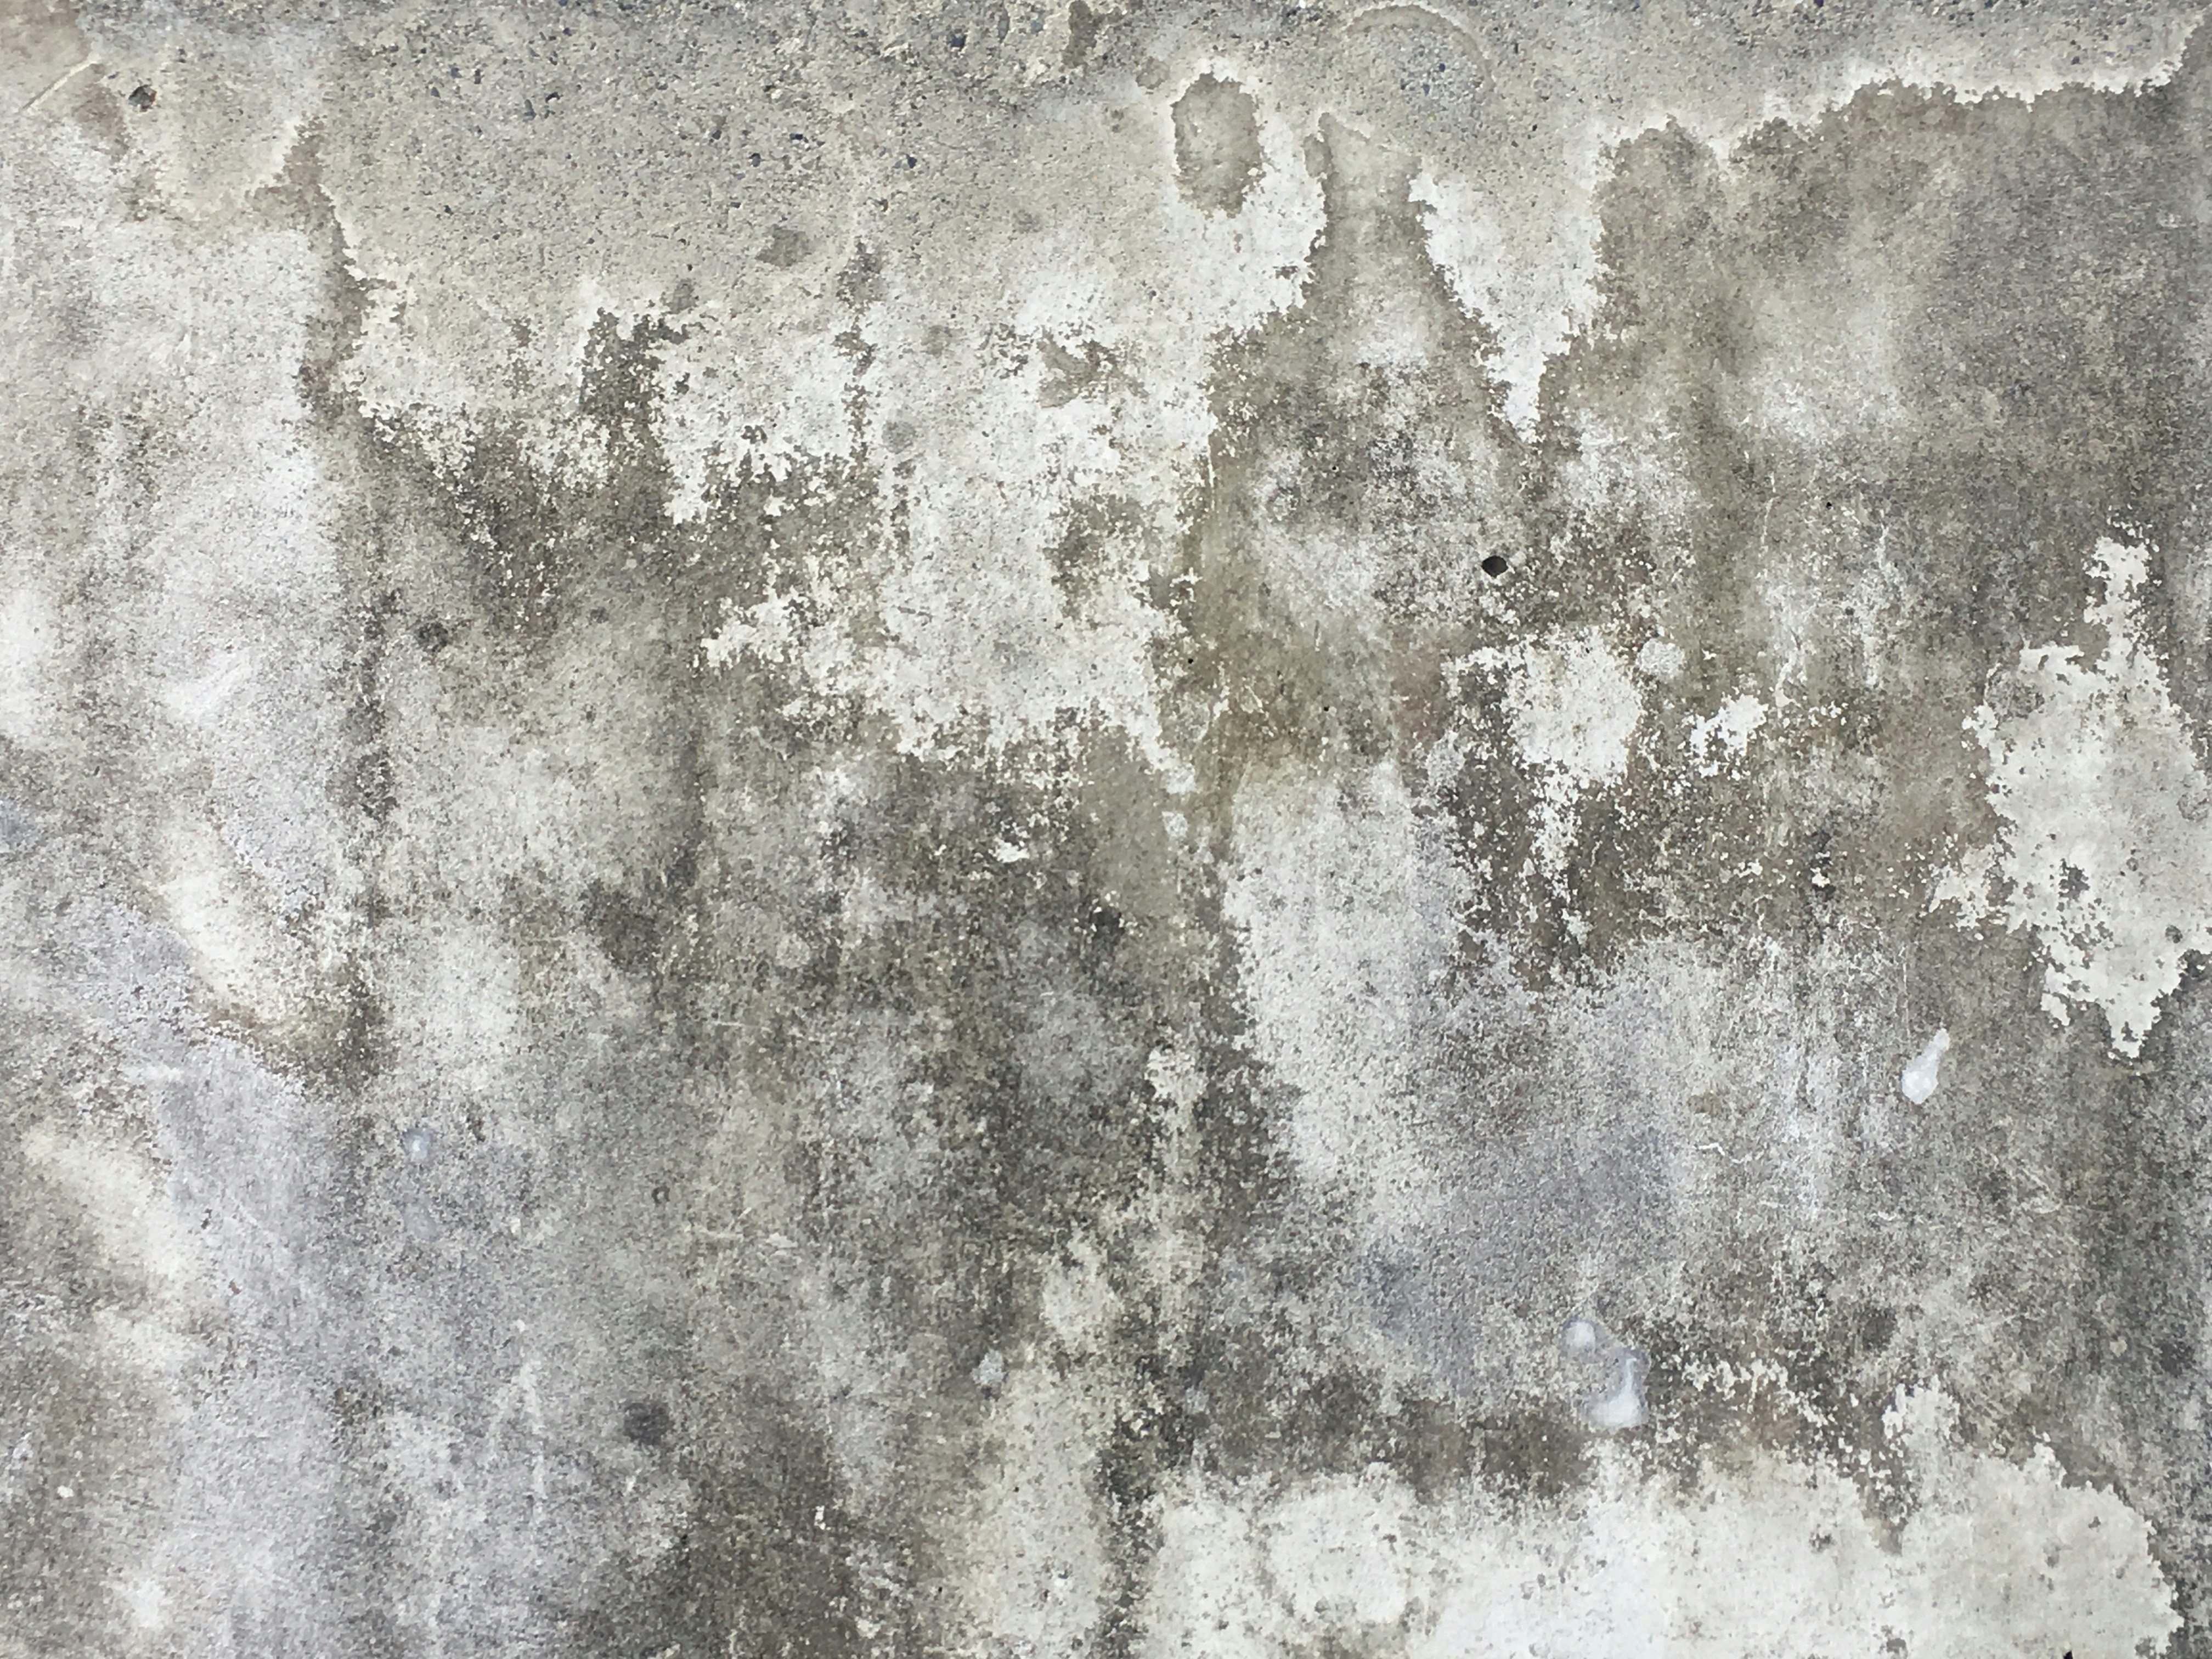 I am drawn to random patterns where ever they present themselves. Cement is a great canvas for these surprising stories. I found this in seating blocks, set against nature, behind the length of condos in Redmond, WA.